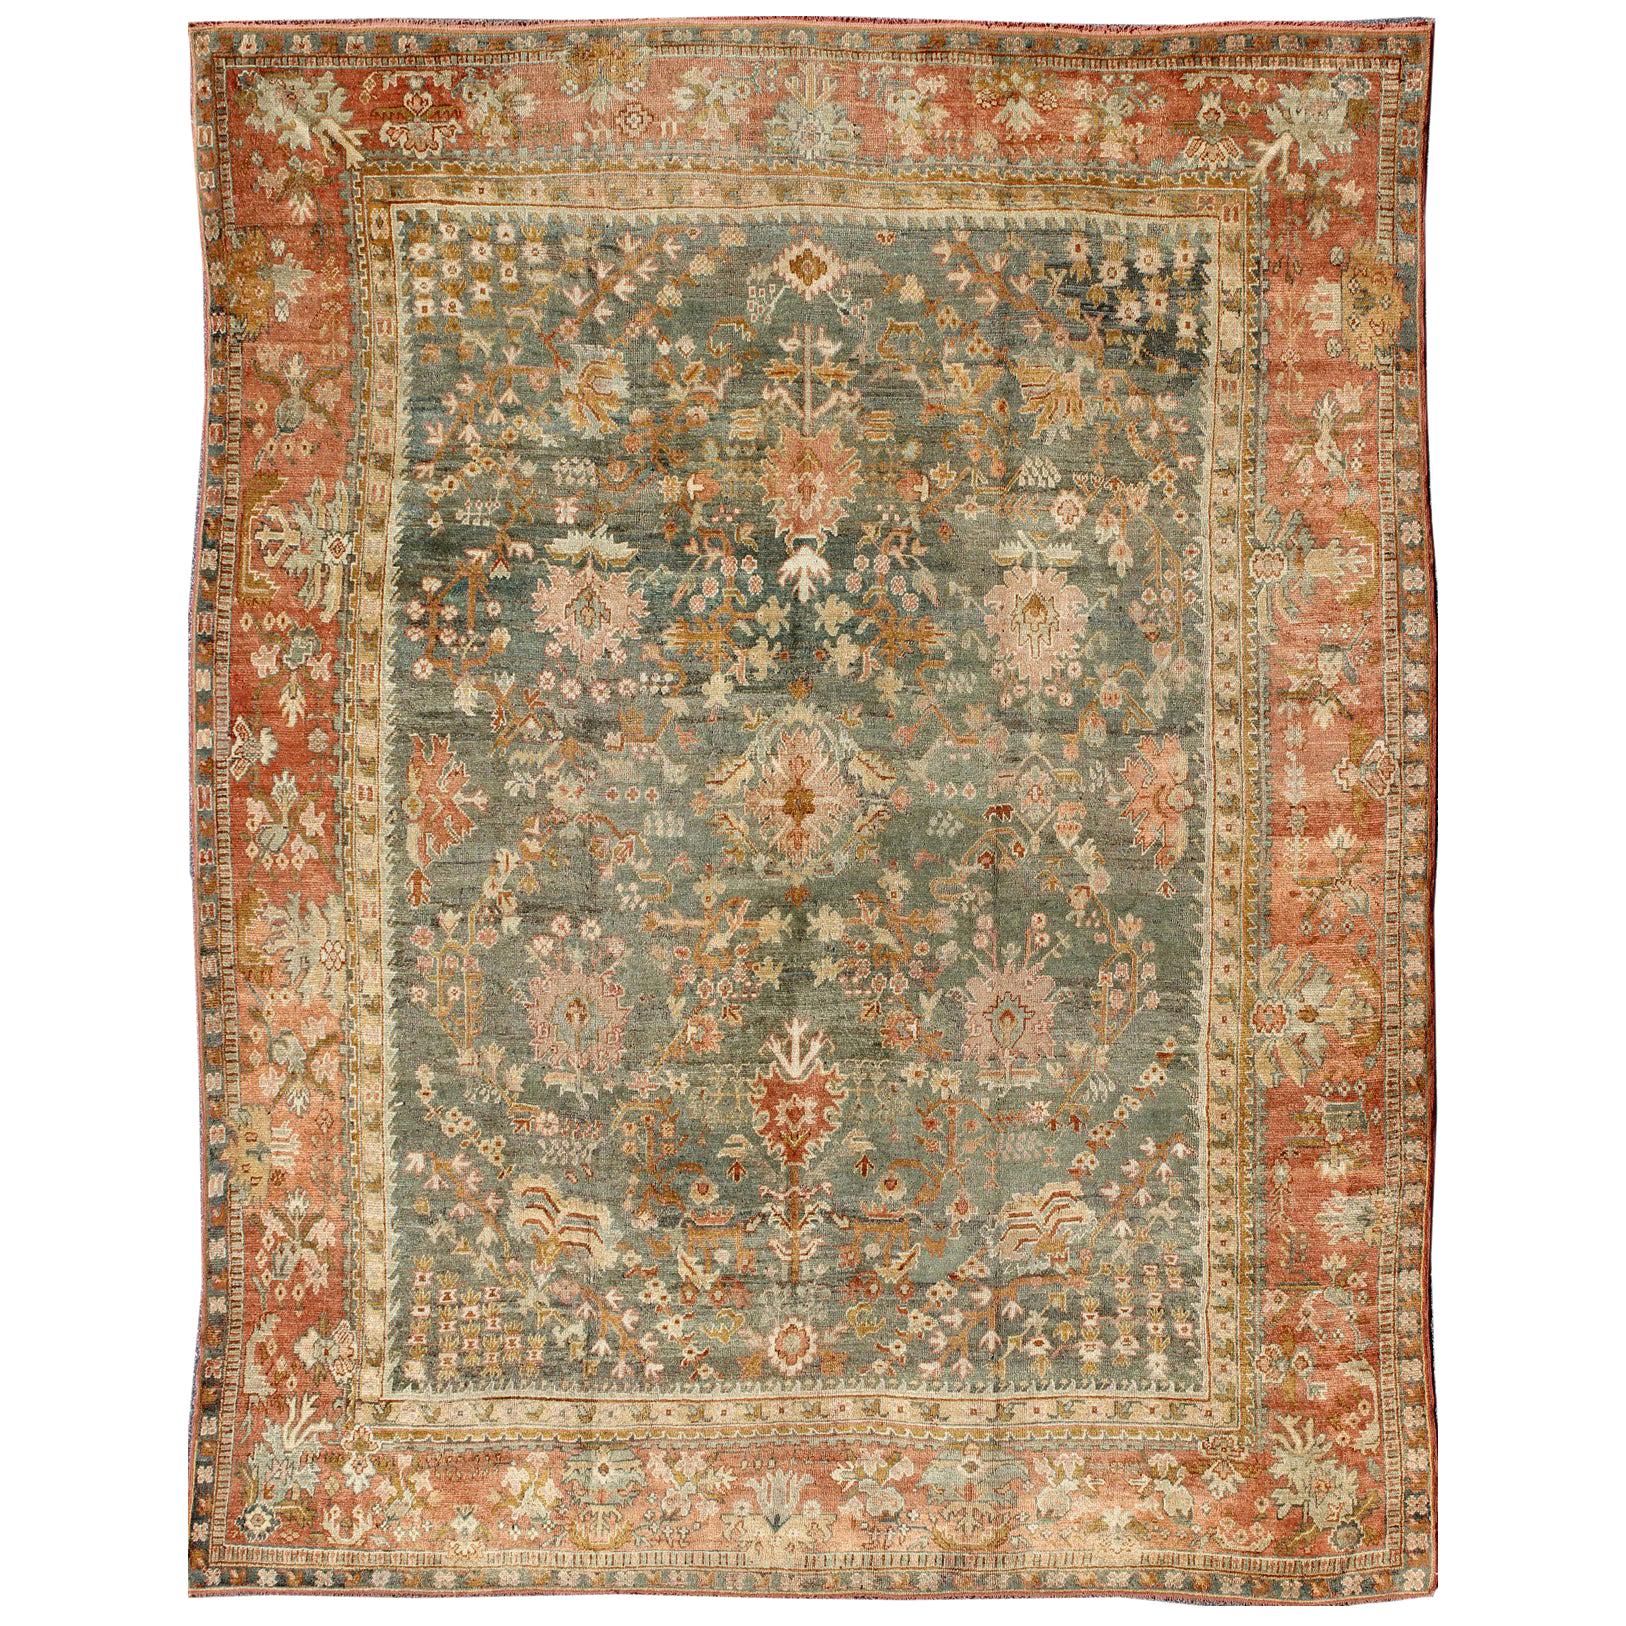 Wide & Large Antique Oushak Rug with Floral Design in Variegated Green and Teal